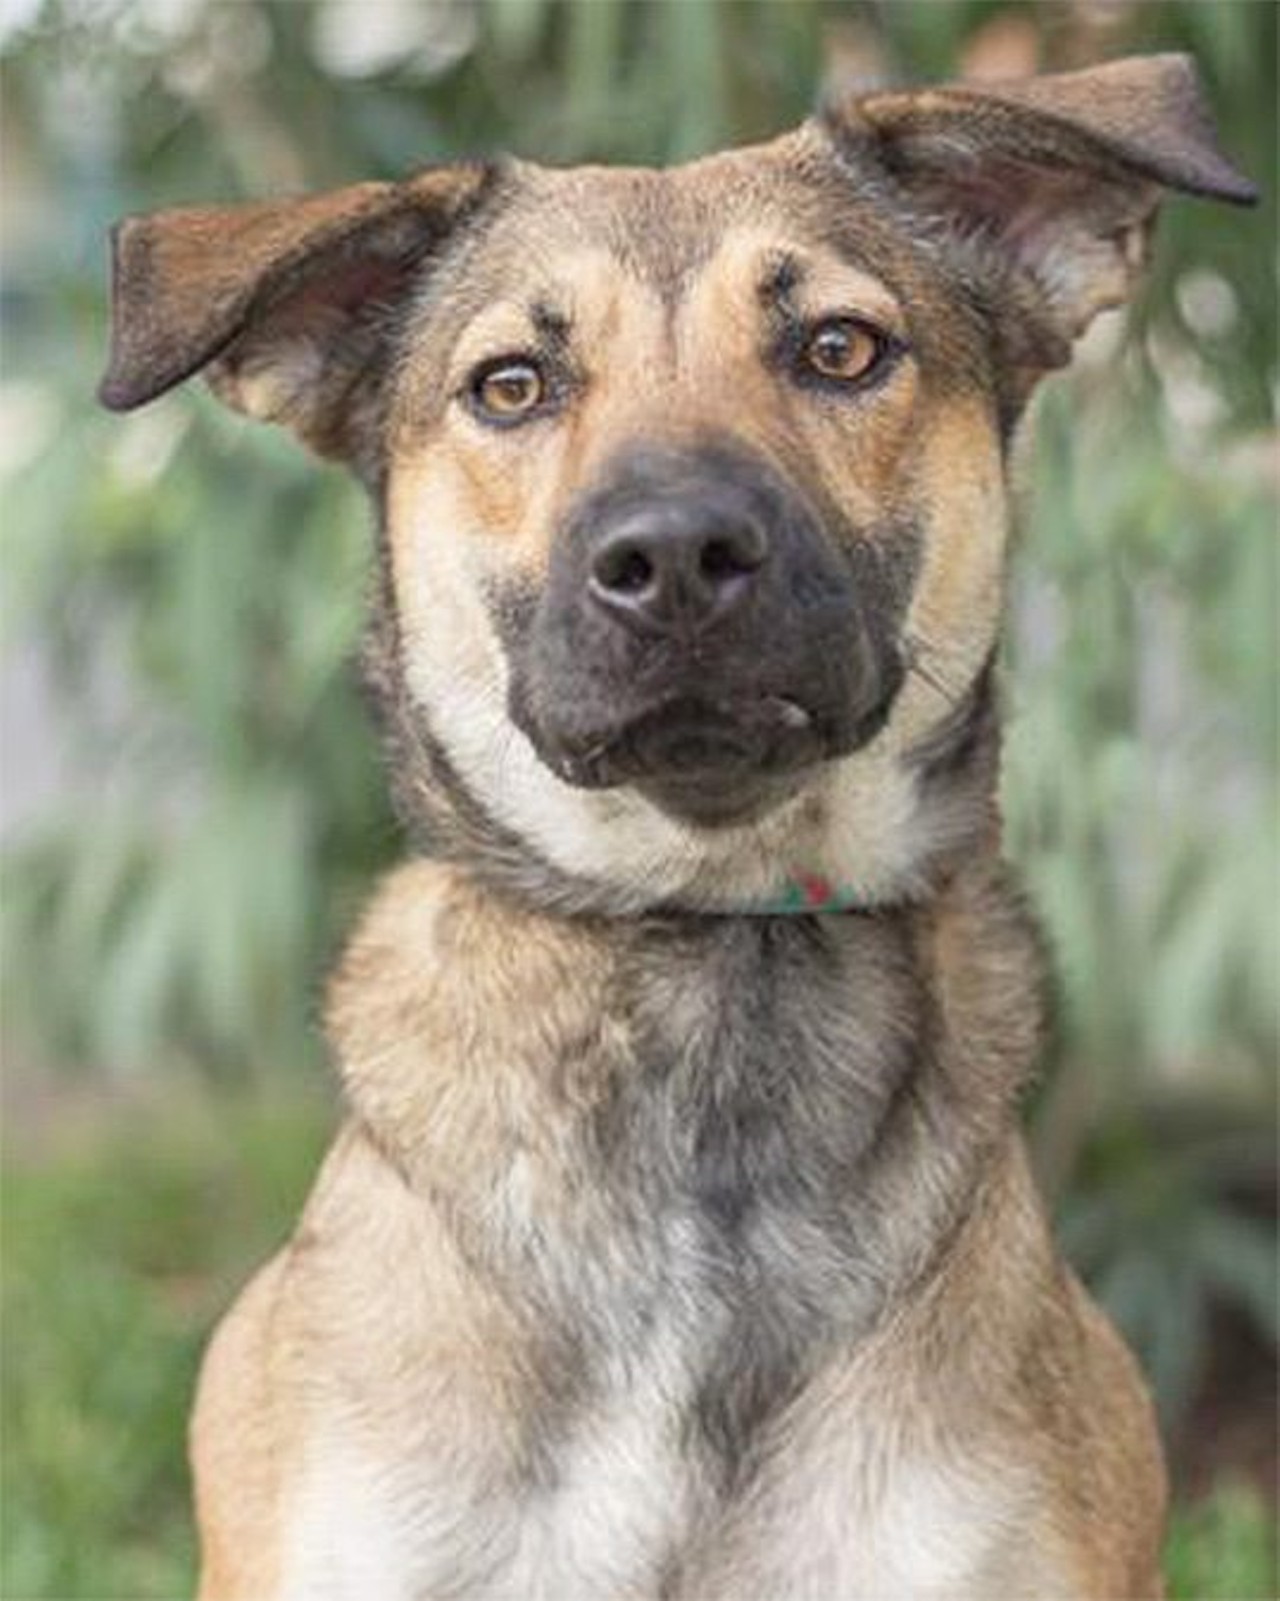  Coco
"Don&#146;t let my expression fool you, I&#146;m a friendly girl. I can sometimes be shy but I&#146;m generally energetic and happy. Don&#146;t my floppy coco colored ears make me look cute? Just imagine these eyes waking you up with kisses and love! Come by and visit me today!"